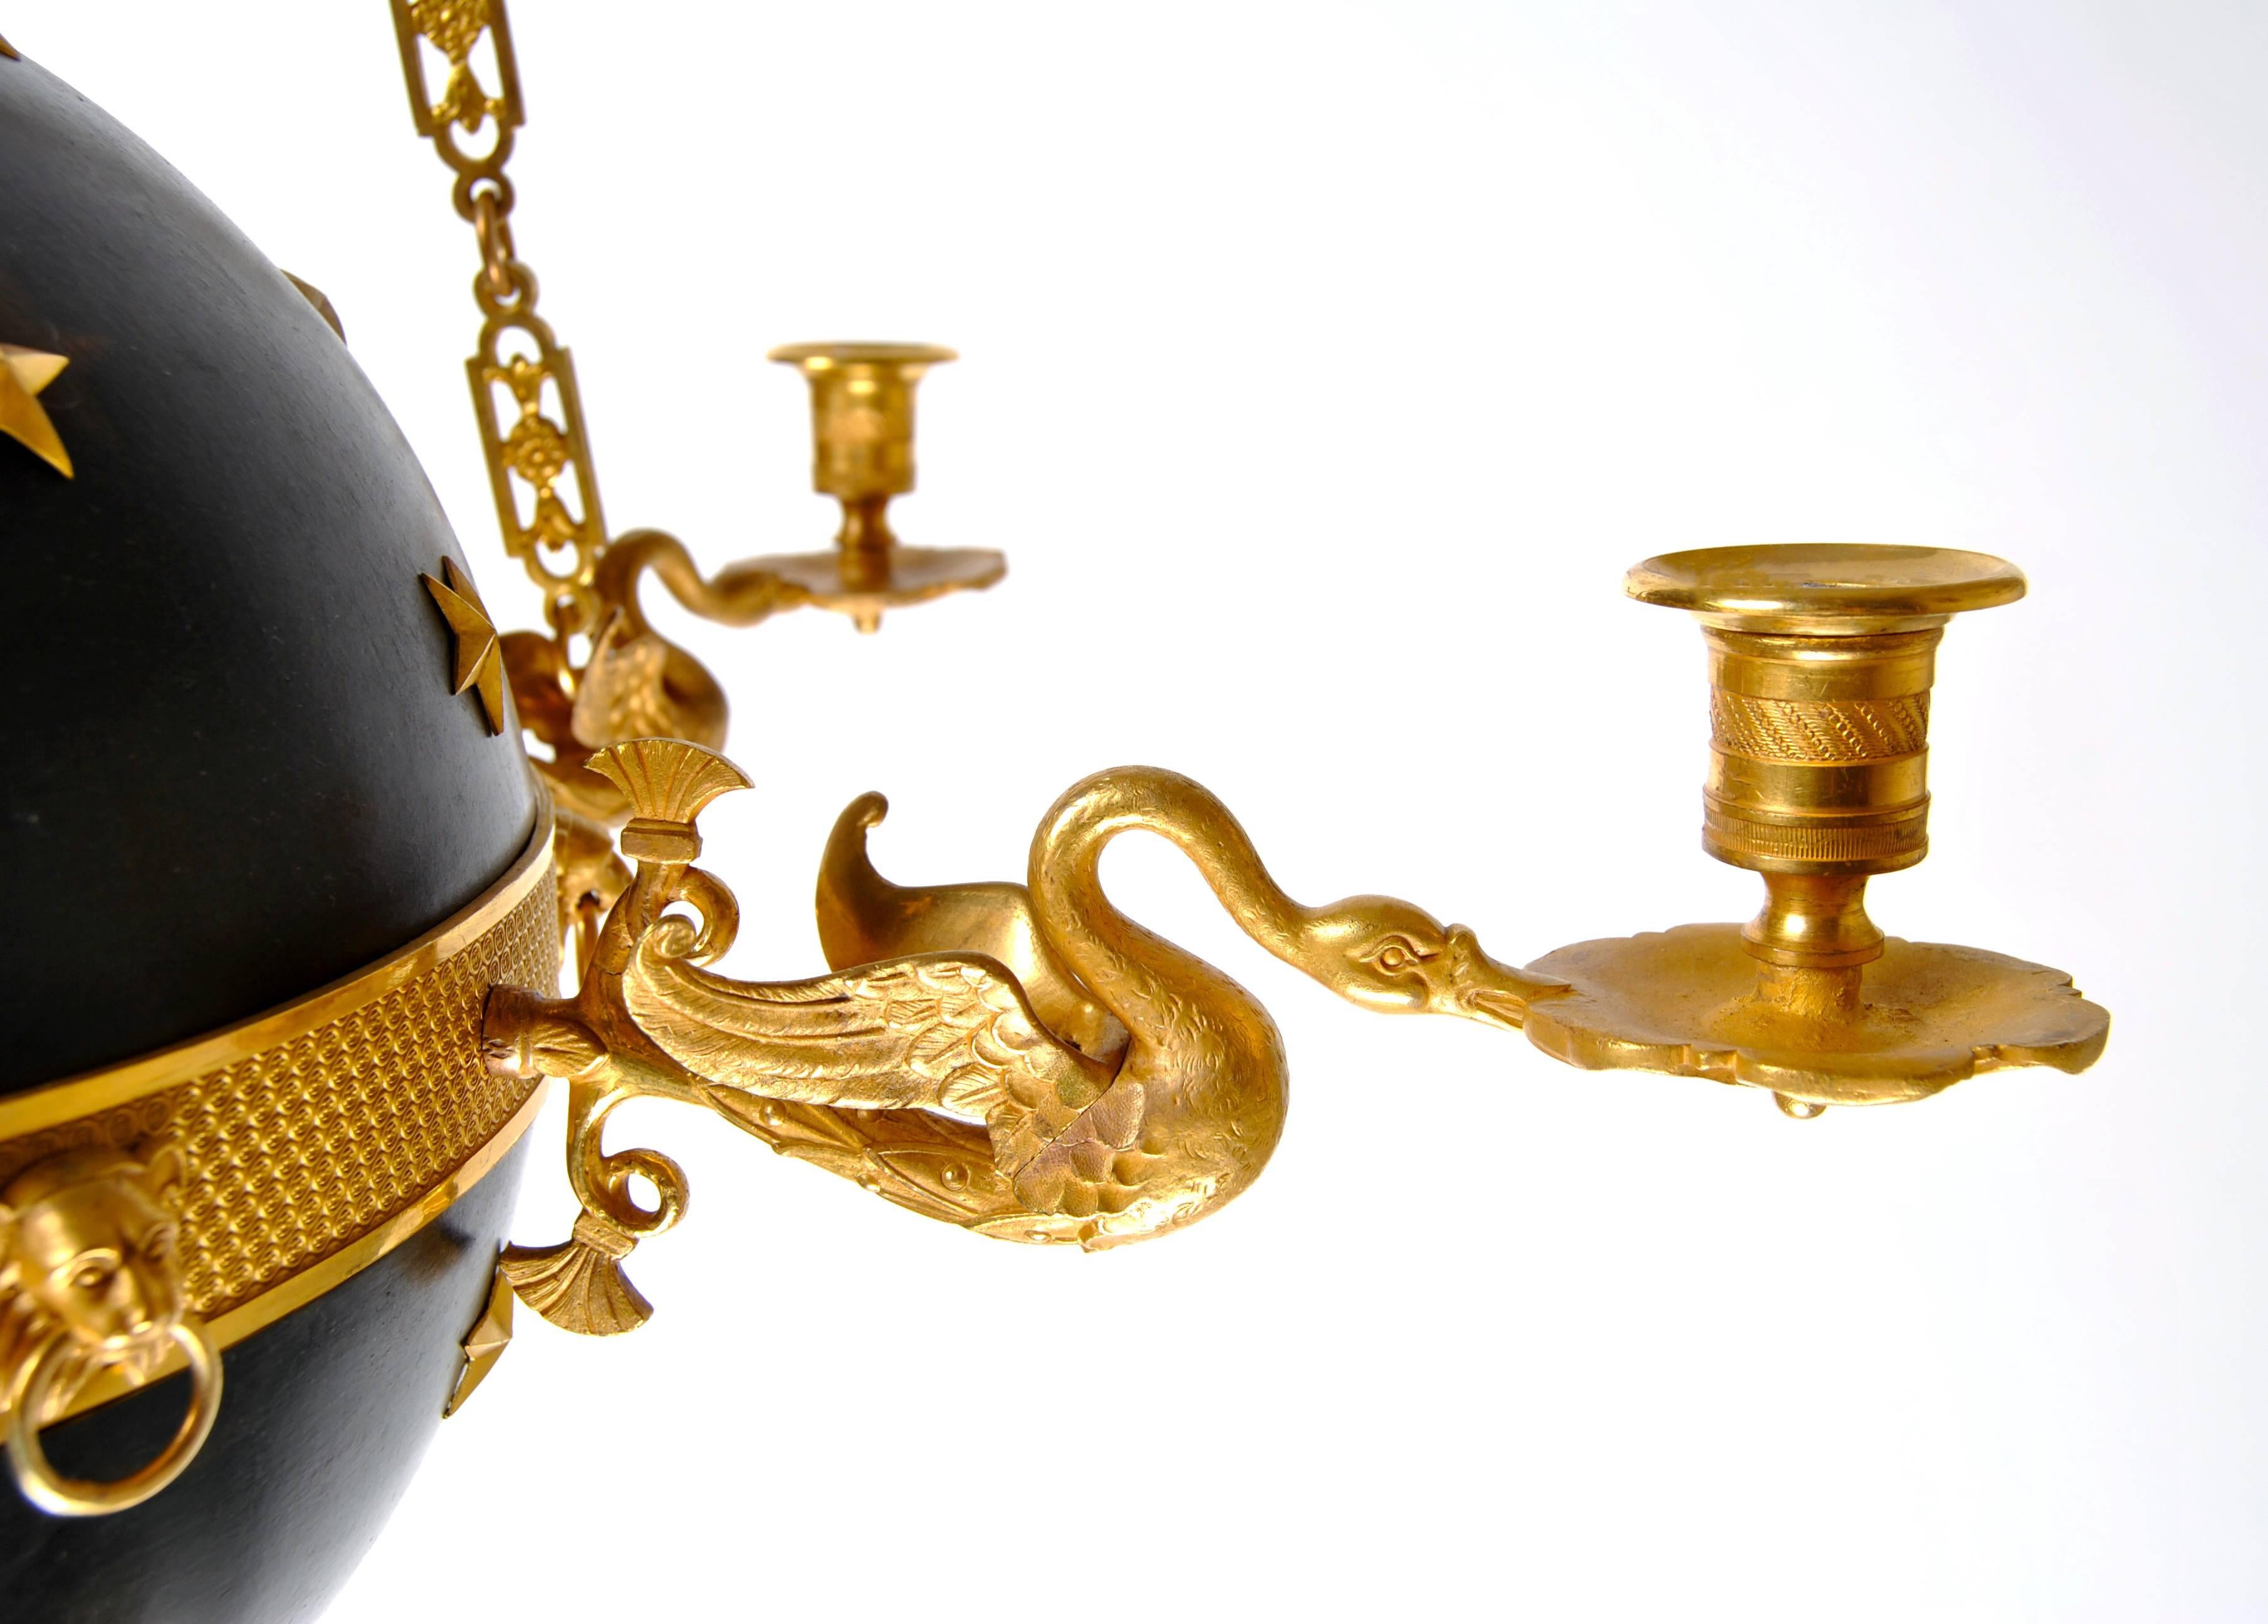 Unusual lamp in excellent condition made circa 1820. Beautifully ornamented with swans, lions and stars. 